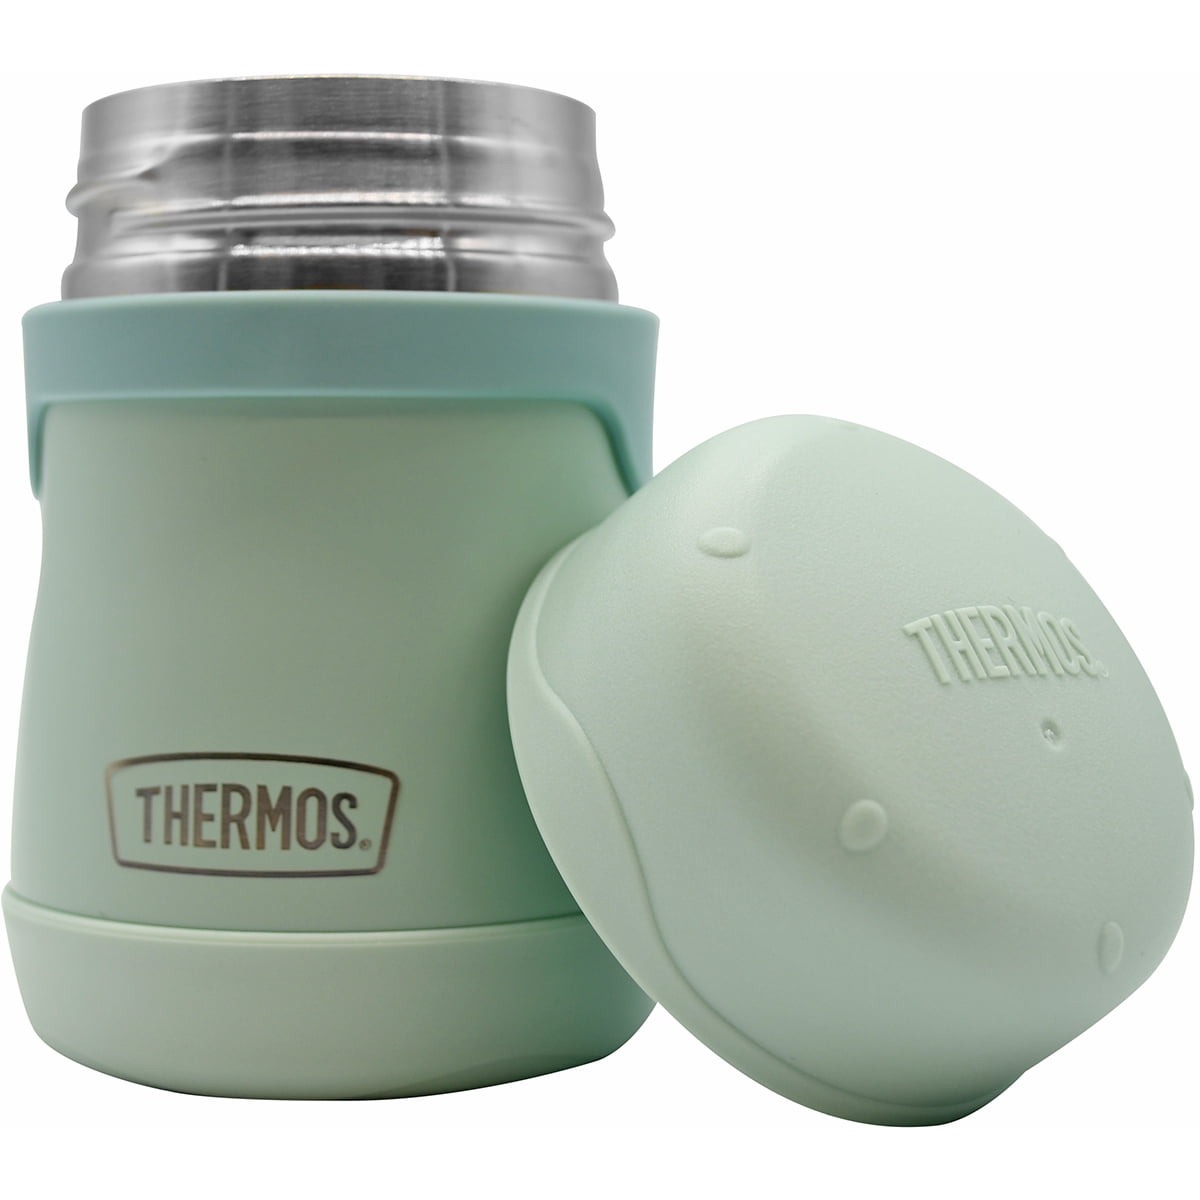 Thermos Baby Vacuum Insulated Stainless Steel Food Jar, 7oz, Gray